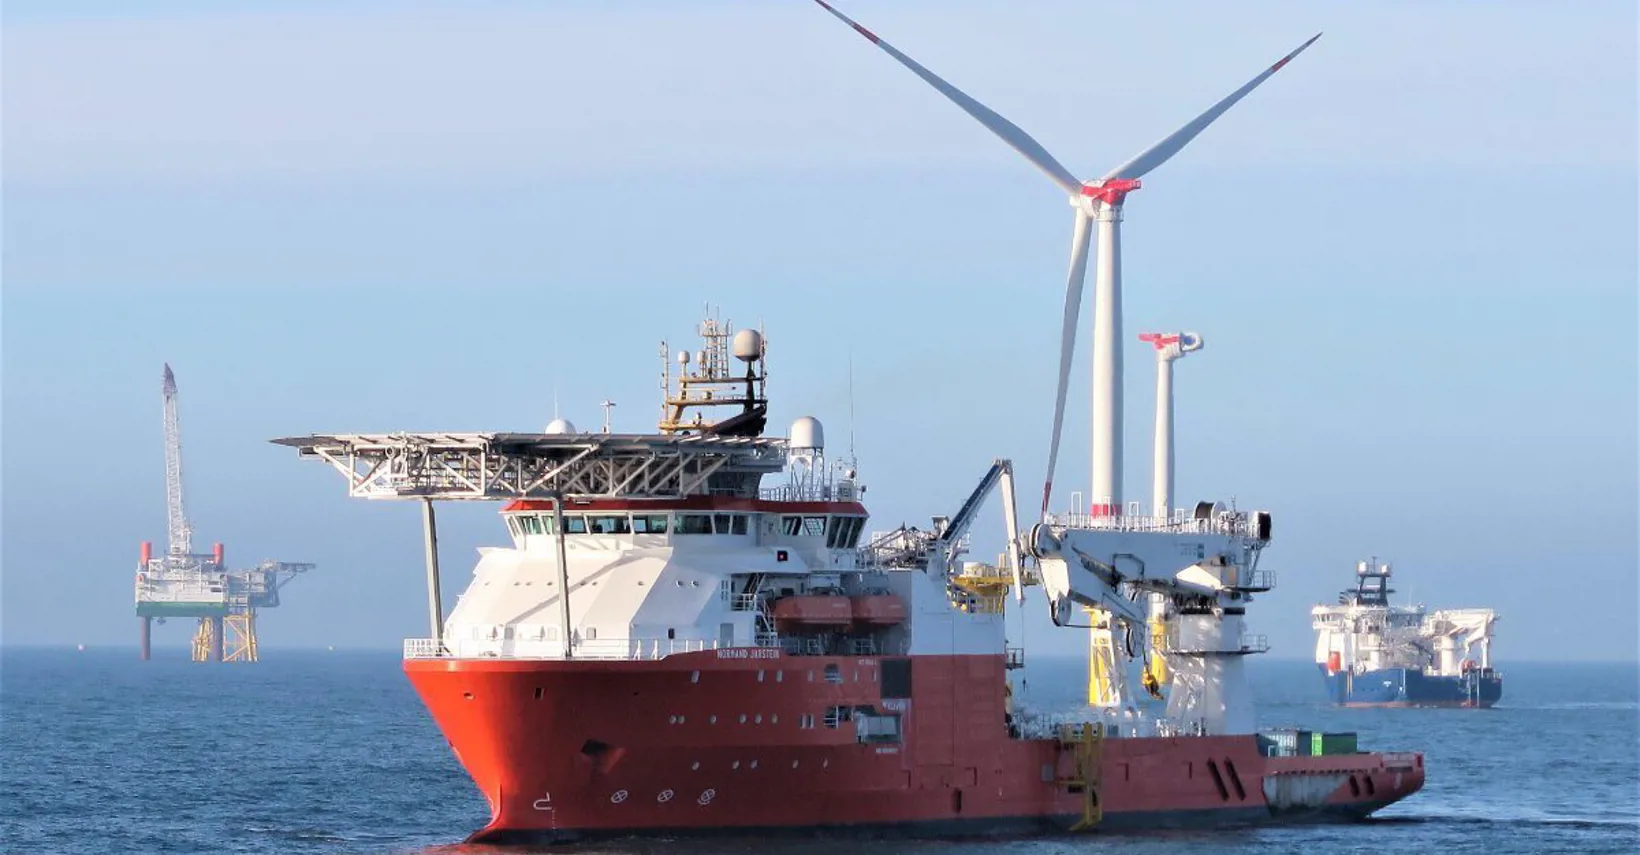 Offshore ROV construction vessel at an offshore wind farm location